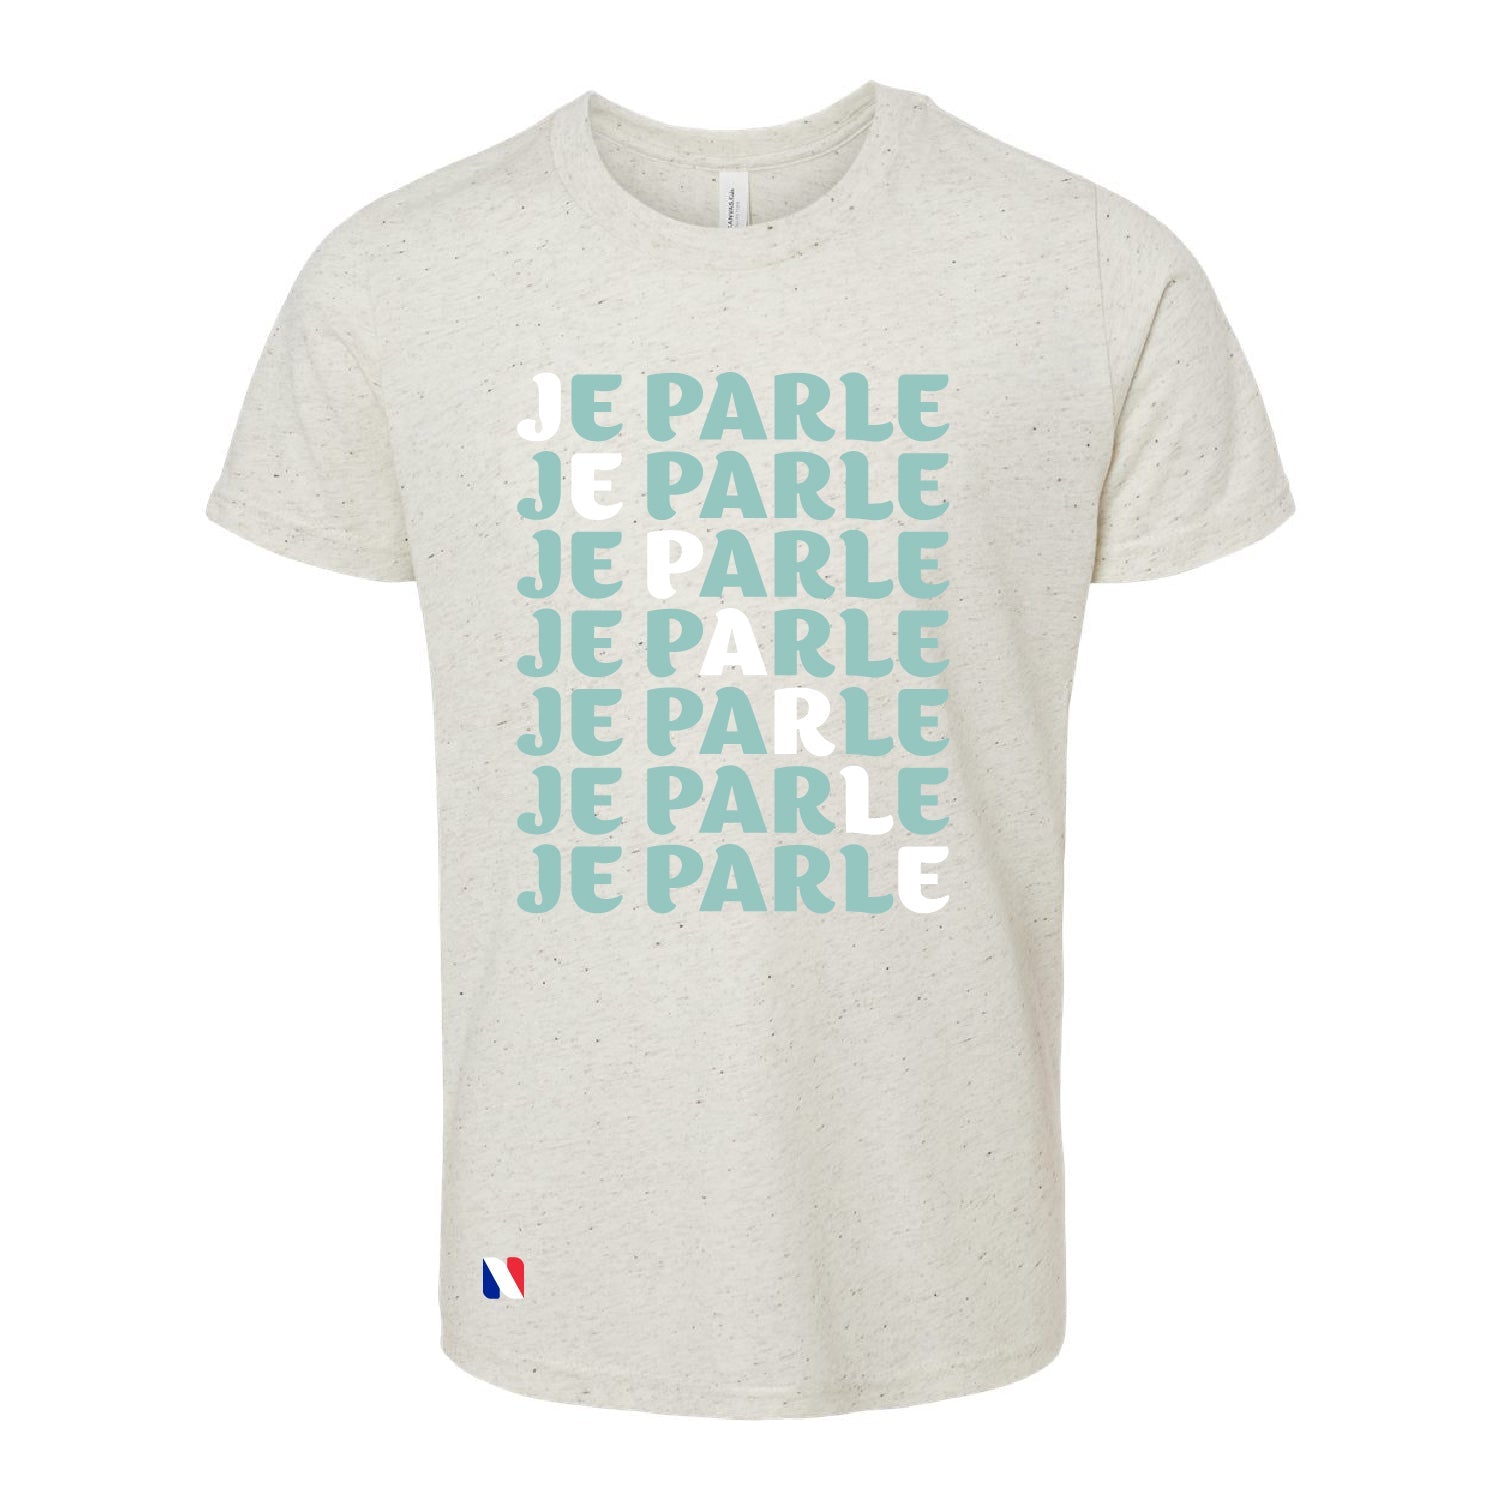 JE PARLE - YOUTH TRIBLEND TEE - DSP On Demand